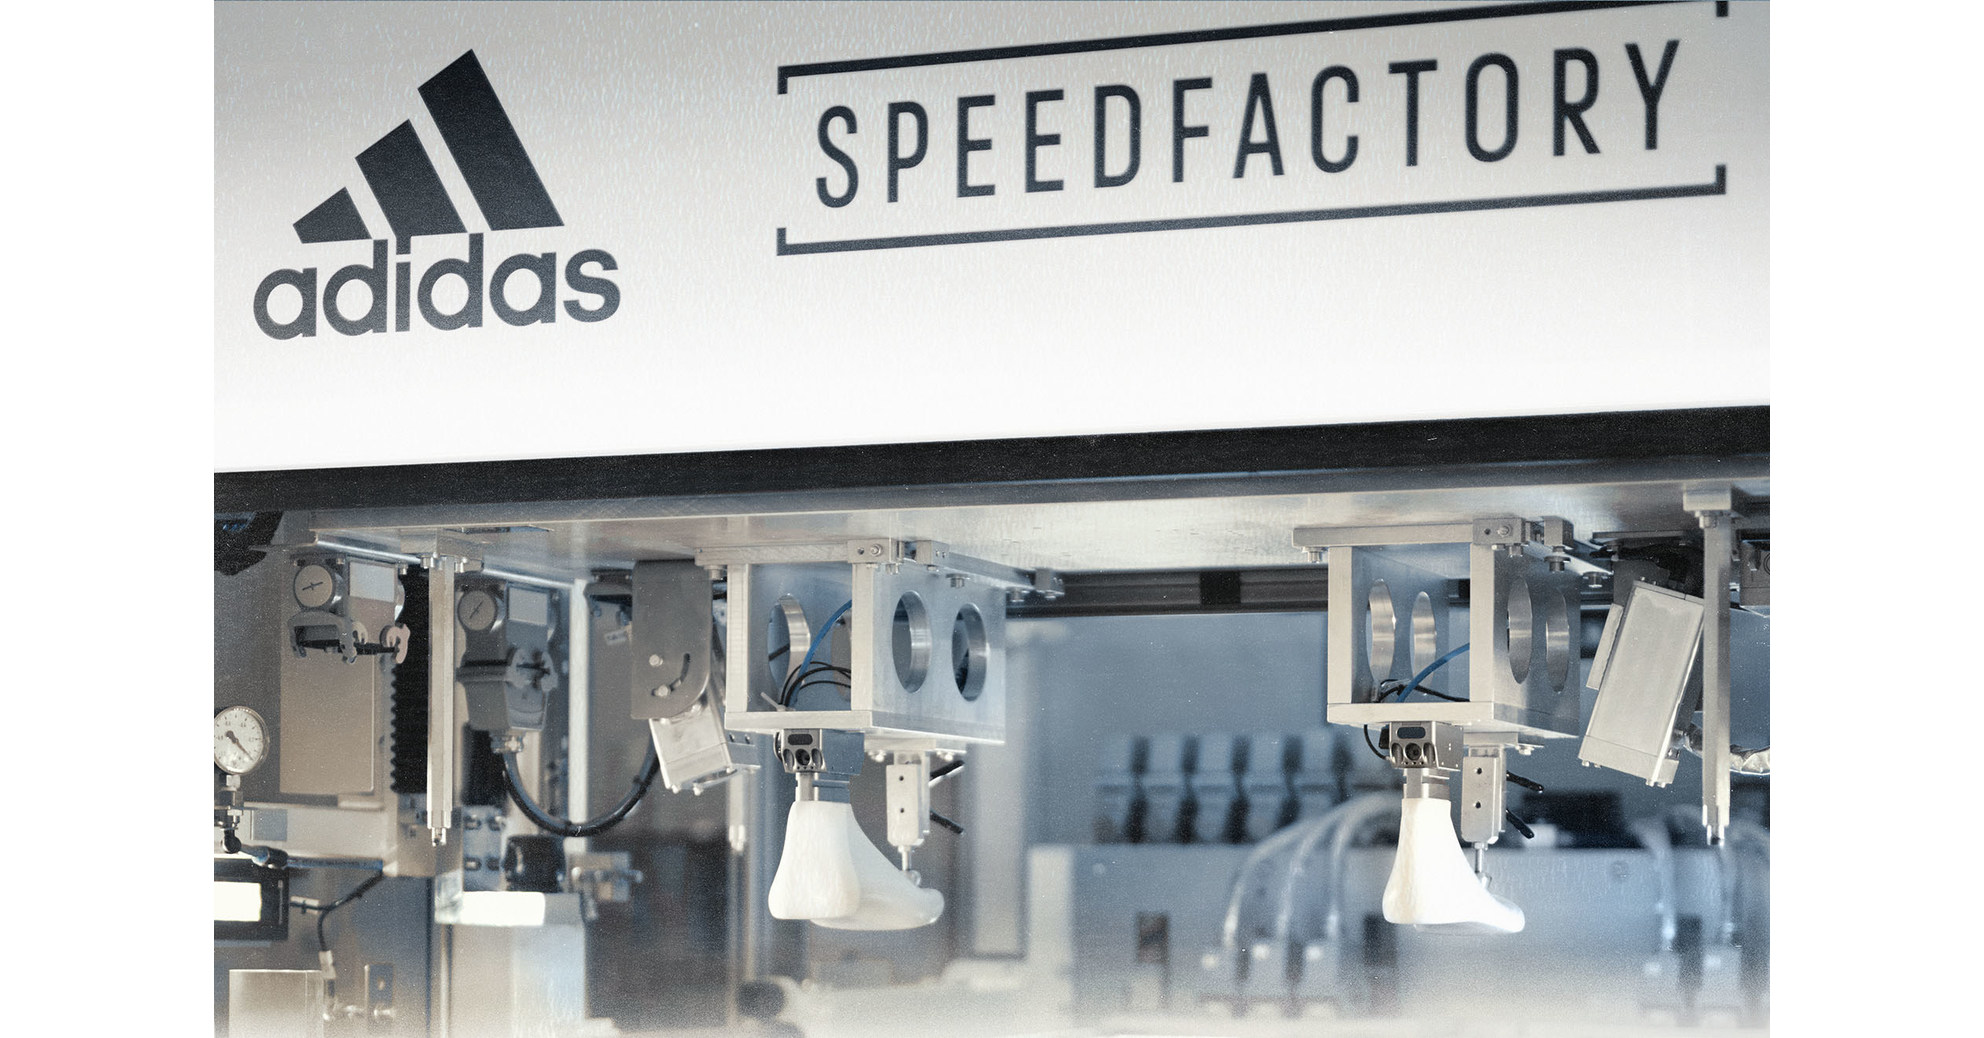 adidas and Foot Locker, Partner to Re-Envision the Future of Creativity and Speed